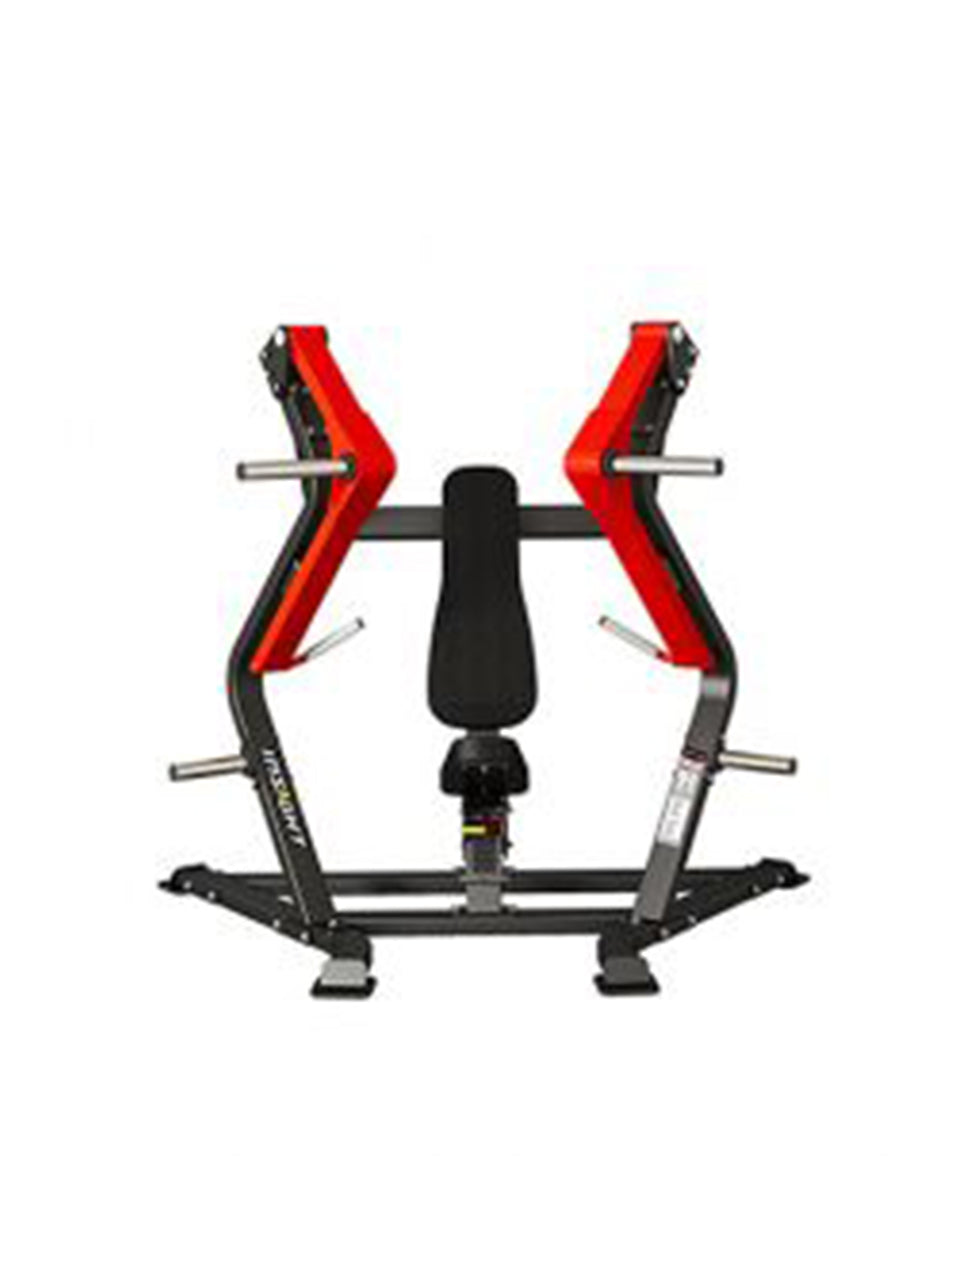 Insight Fitness DH016 Decline Chest Press